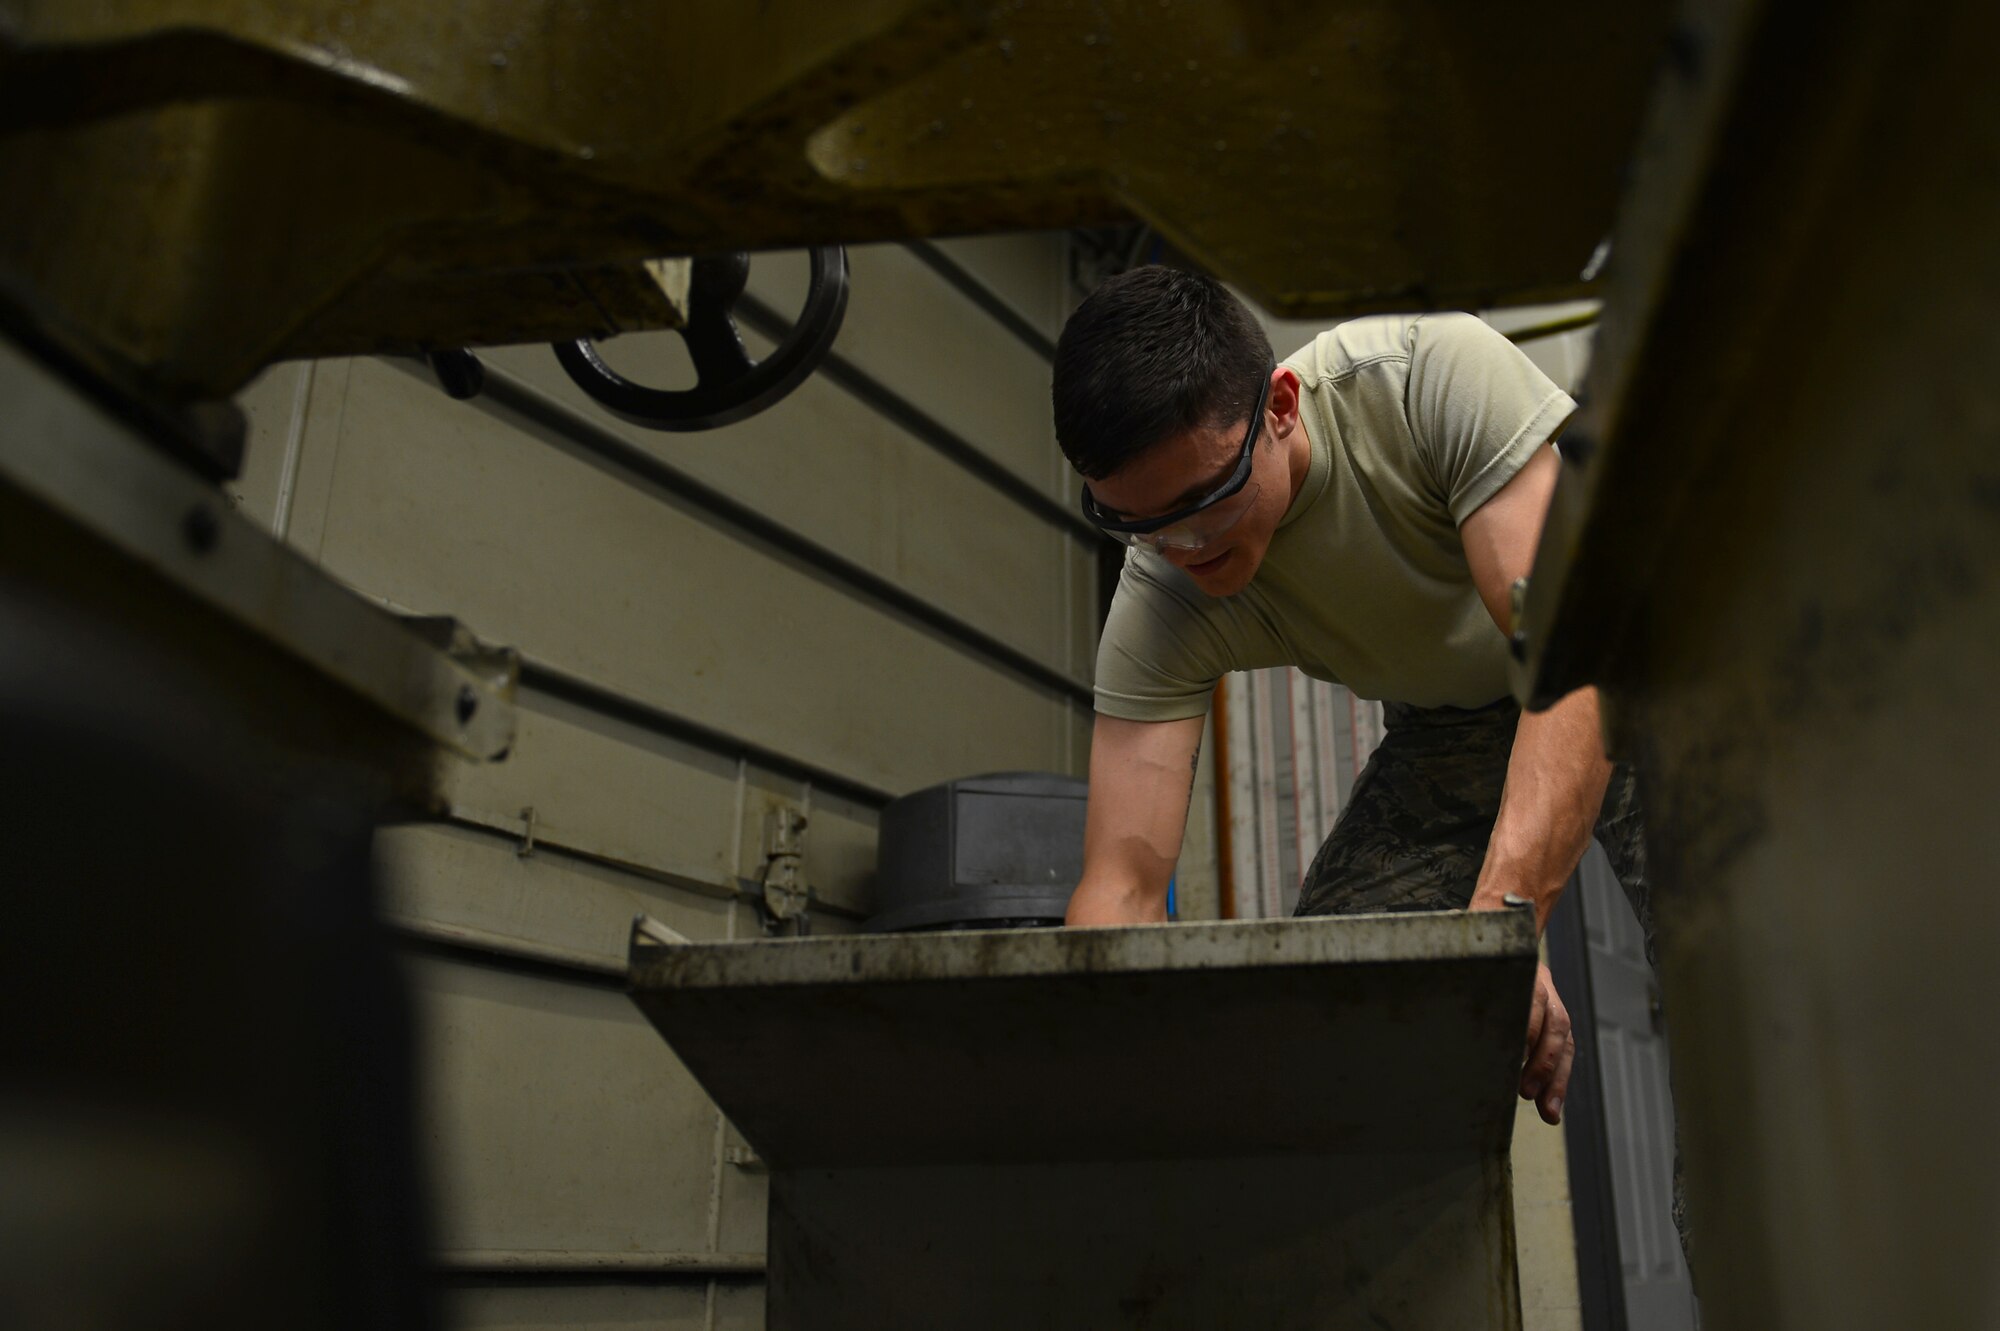 U.S. Air Force Airman 1st Class Mason Carny, 20th Equipment Maintenance Squadron aircraft metals technology technician, cleans coolant out of a piece of machinery at Shaw Air Force Base, S.C., Feb. 2, 2017. At the end of each shift, Airmen assigned to the 20th EMS metals technology lab are required to clean workspaces for Airmen entering the next shift. (U.S. Air Force photo by Airman 1st Class Christopher Maldonado)